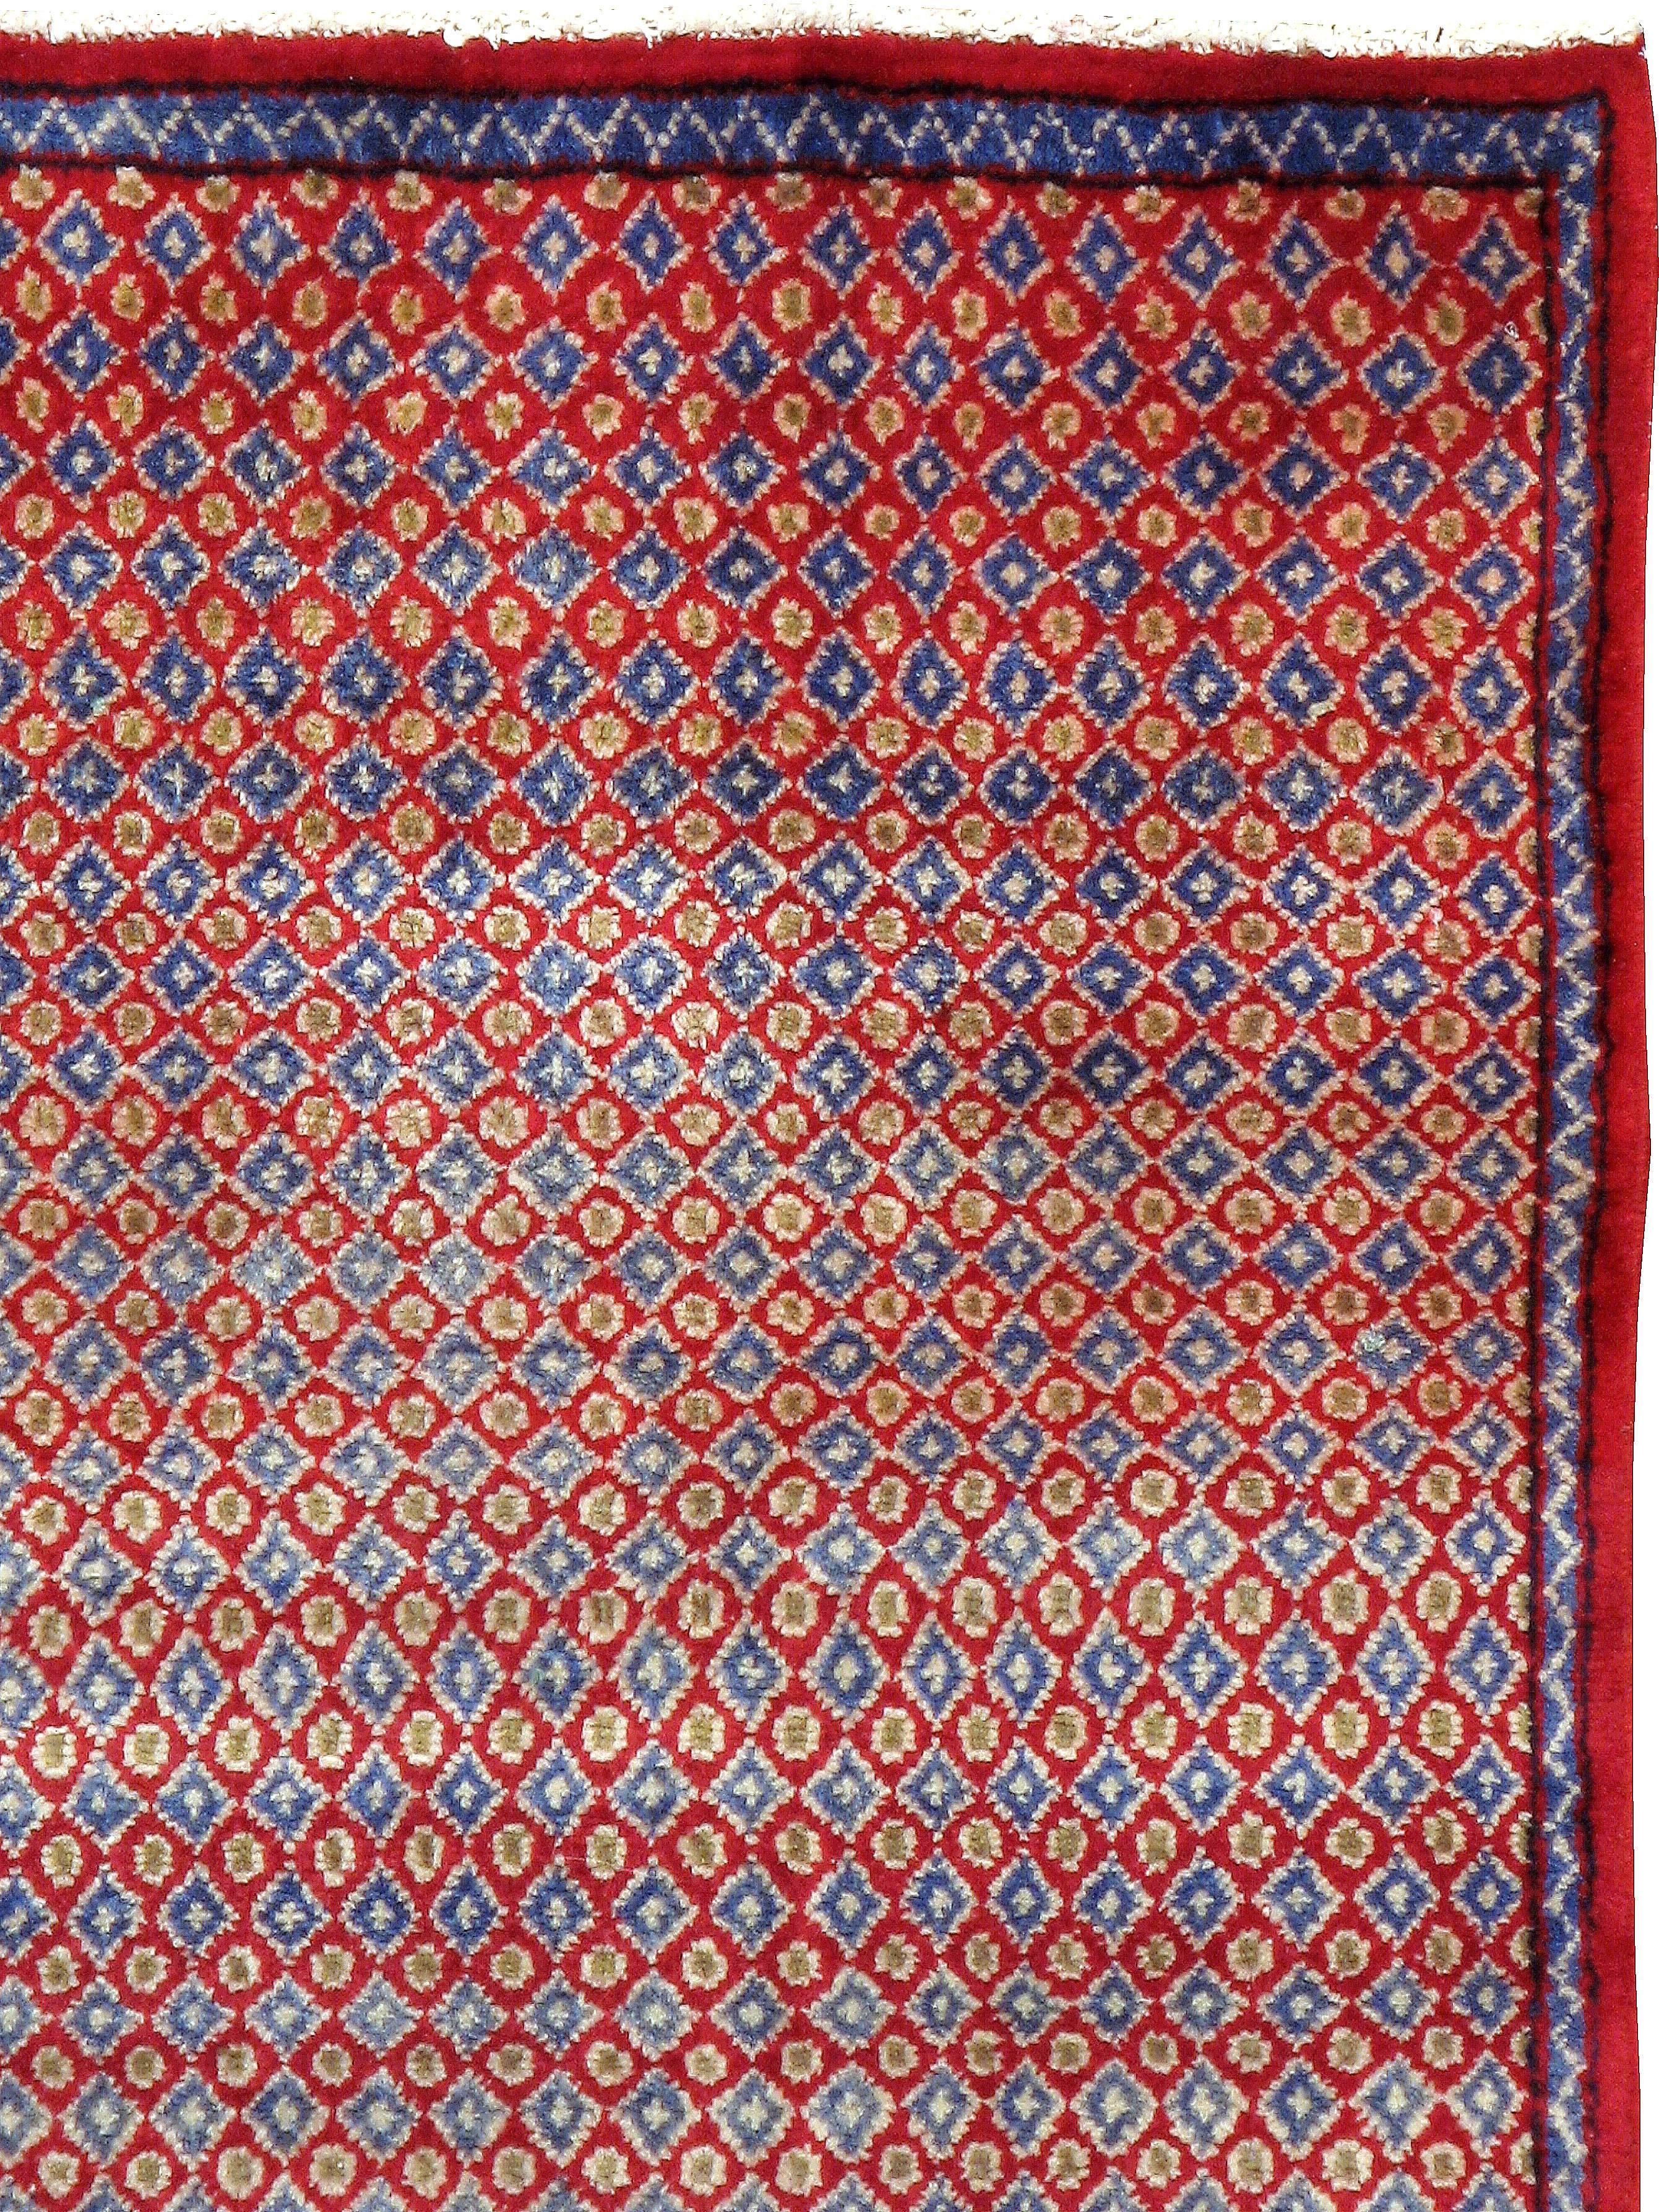 A vintage Persian Kashan carpet with a modernist design from the second quarter of the 20th century.